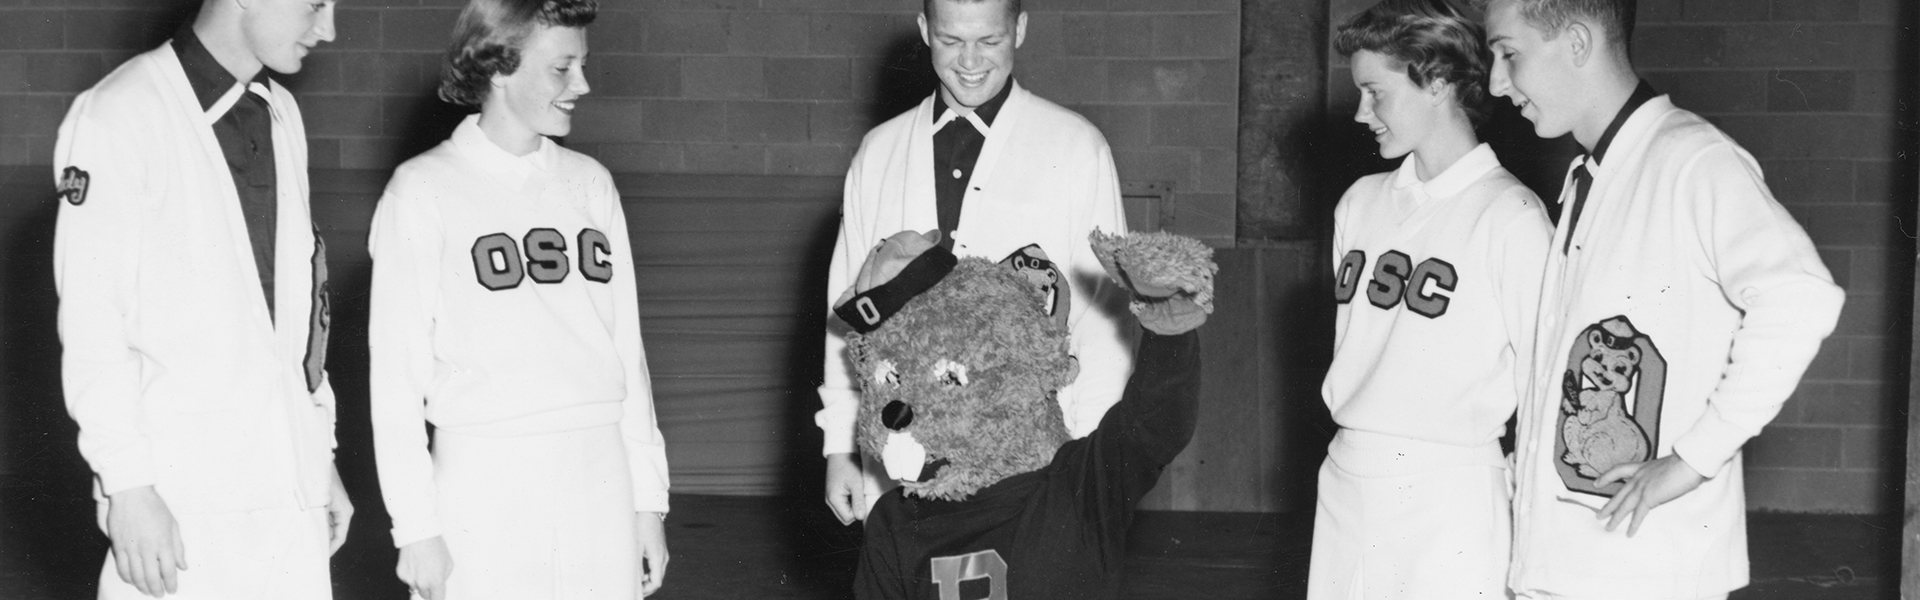 1952 black and white photo of Benny and cheer leaders.